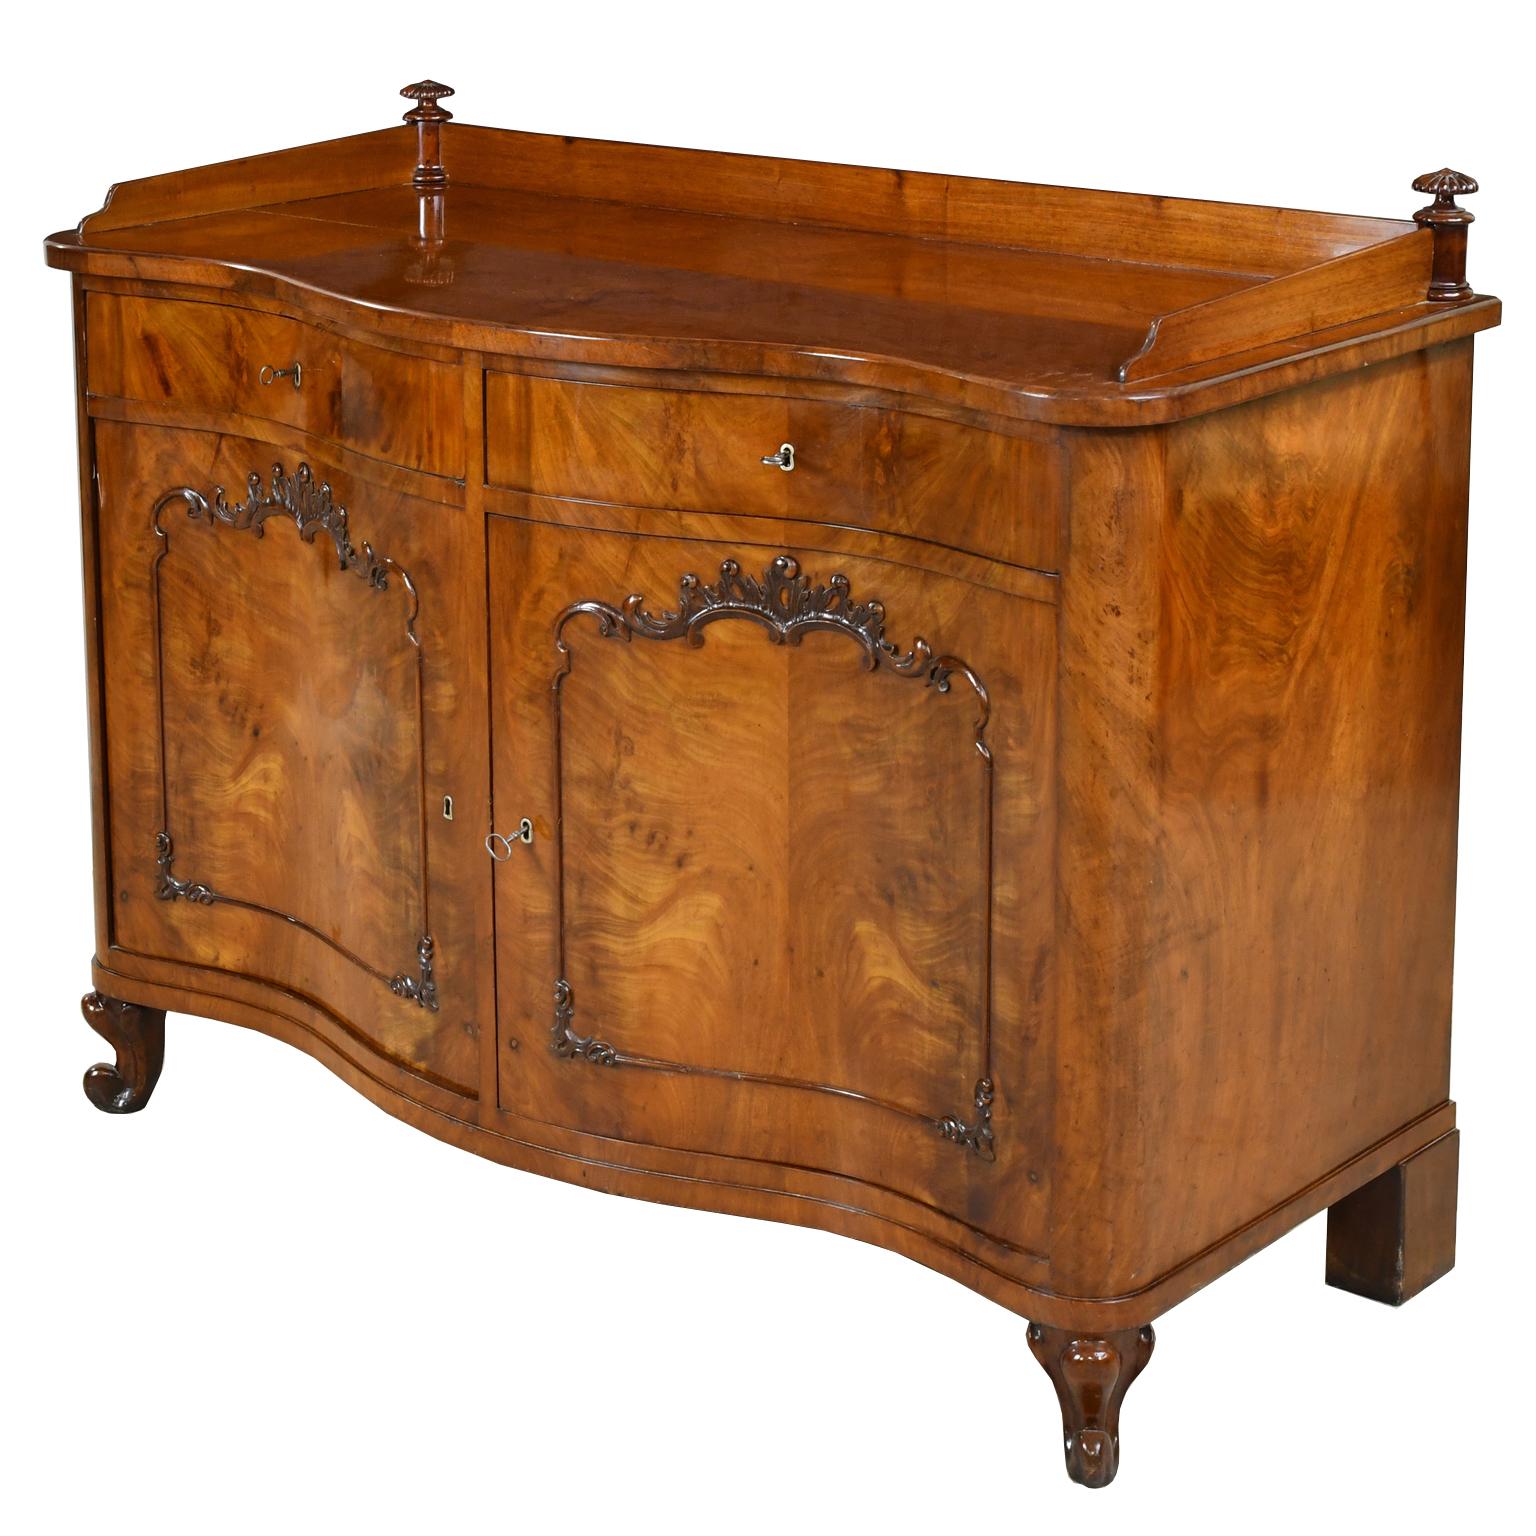 A very lovely and well-crafted sideboard/ credenza in fine West Indies mahogany with serpentine front that features two drawers over two cabinet doors, with carved rocaille details bordering the door panels. A small backsplash runs along the top